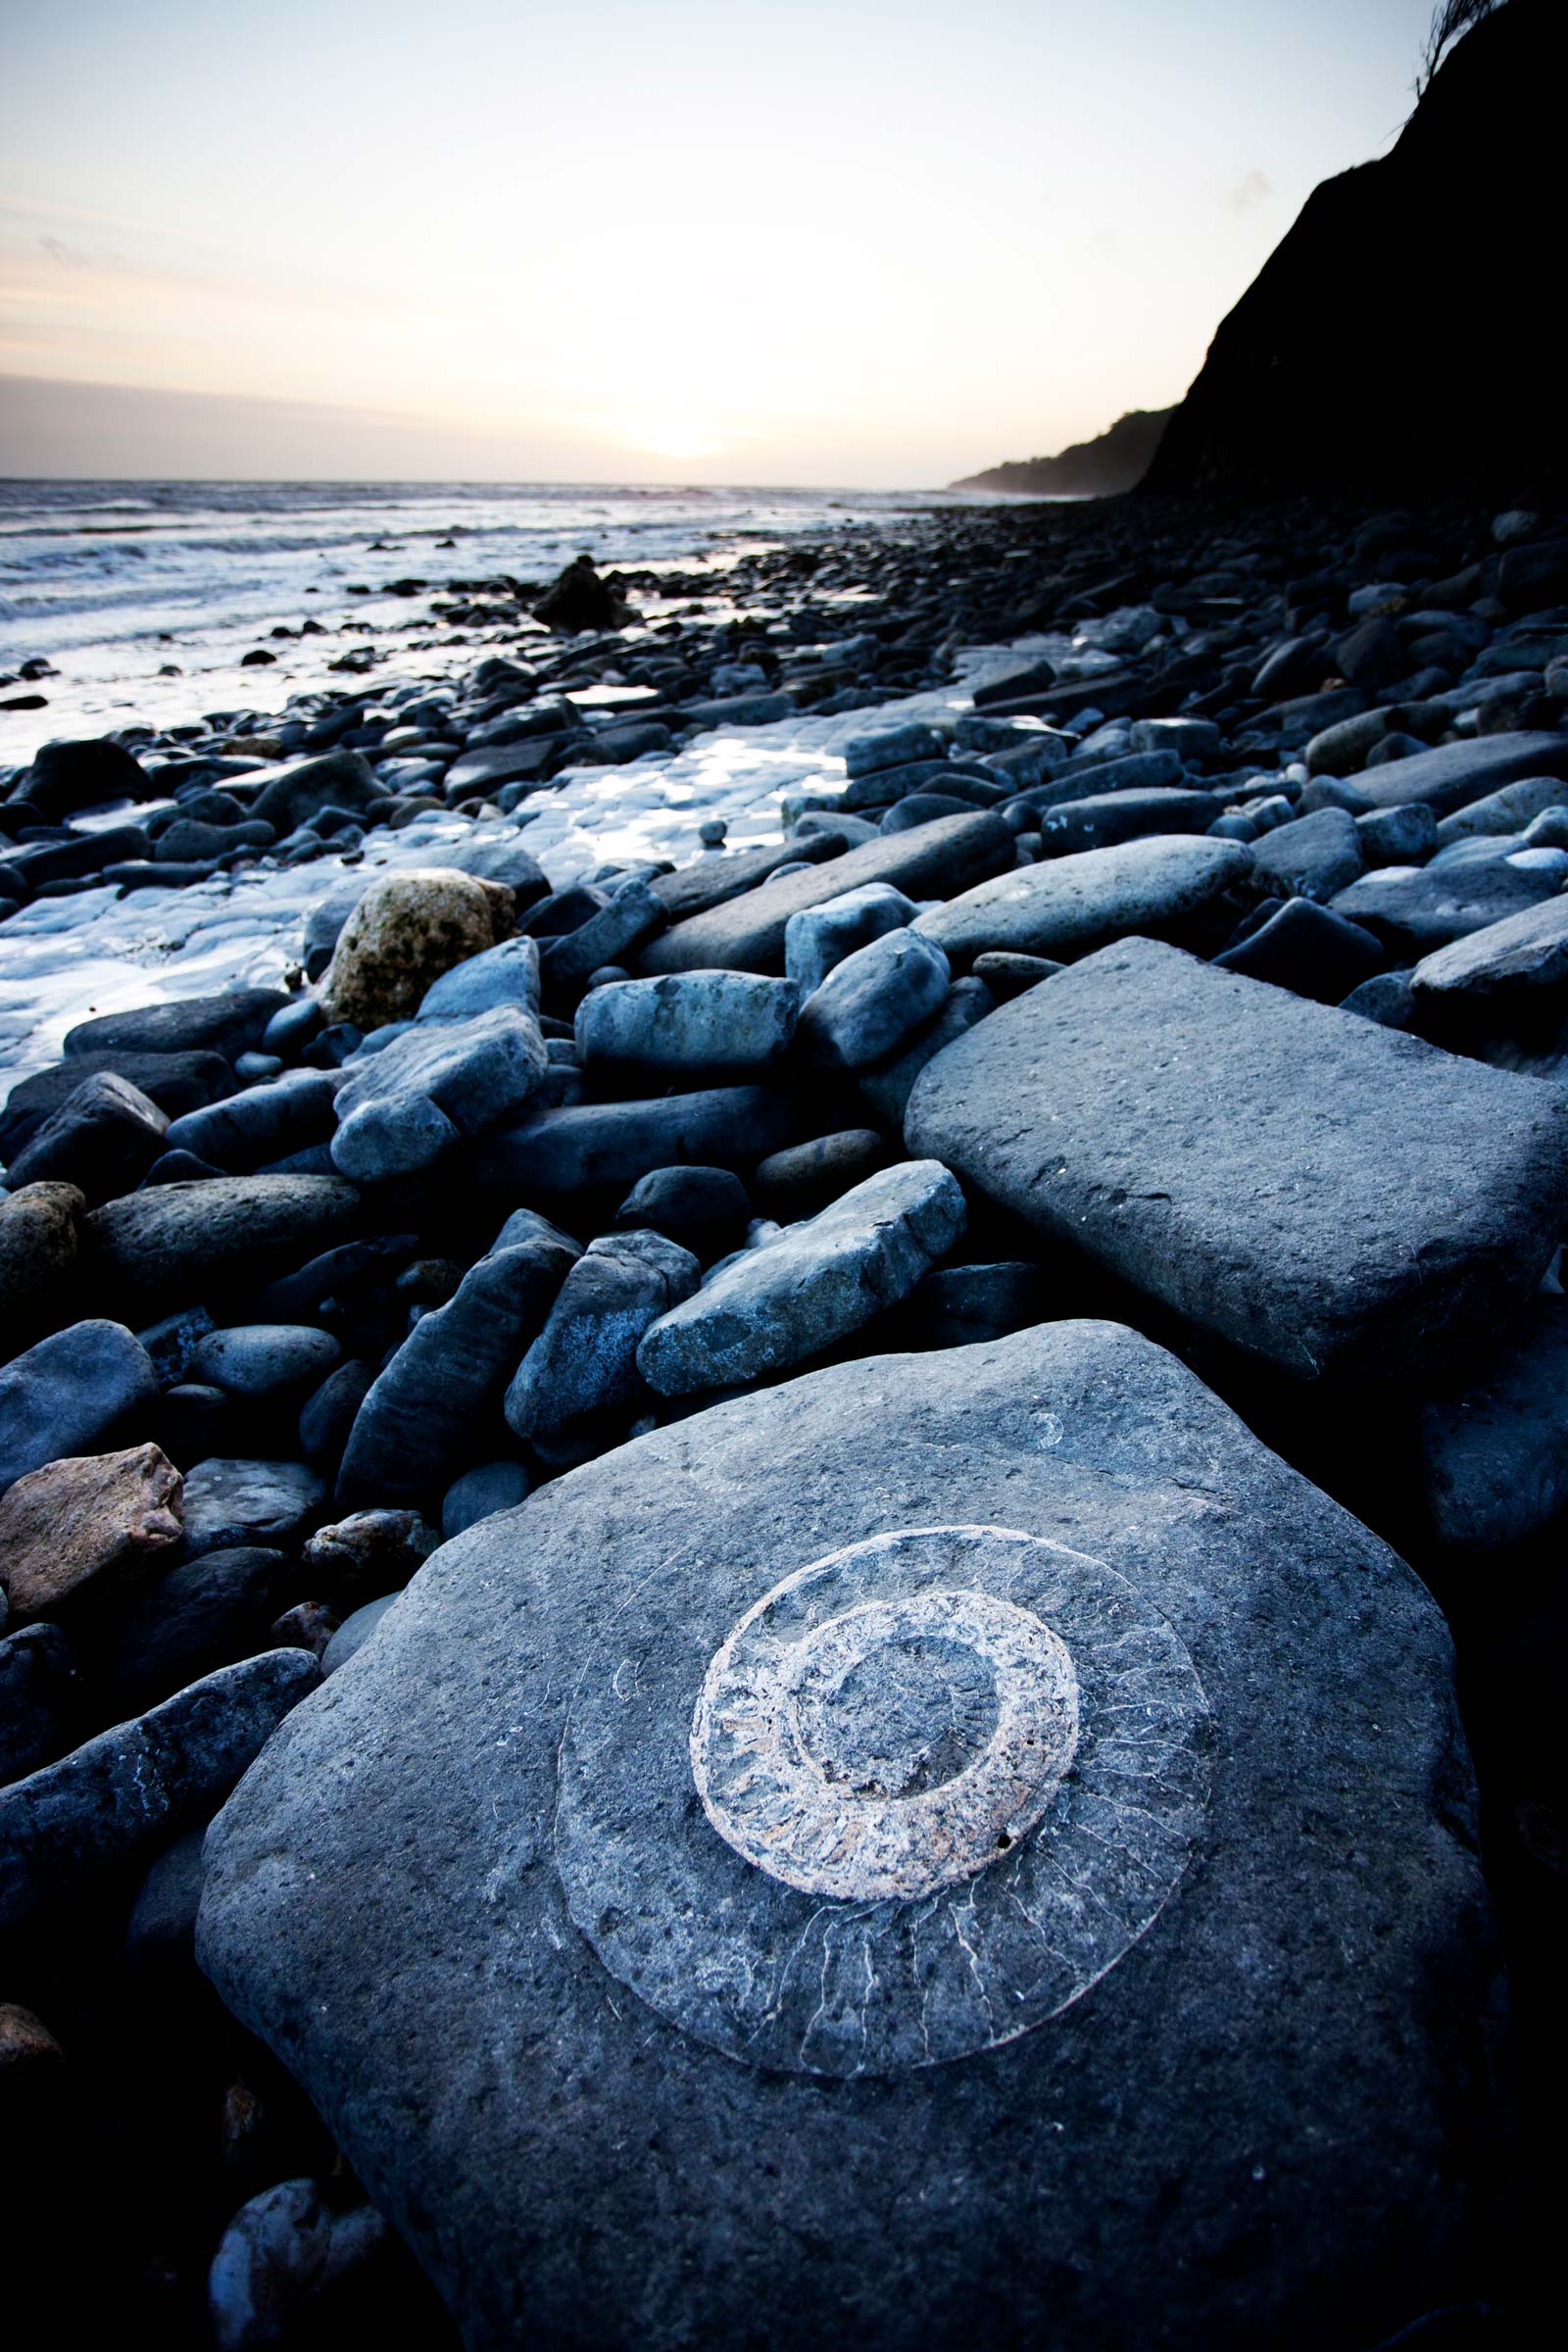 A large fossil on the beach in north Dorset